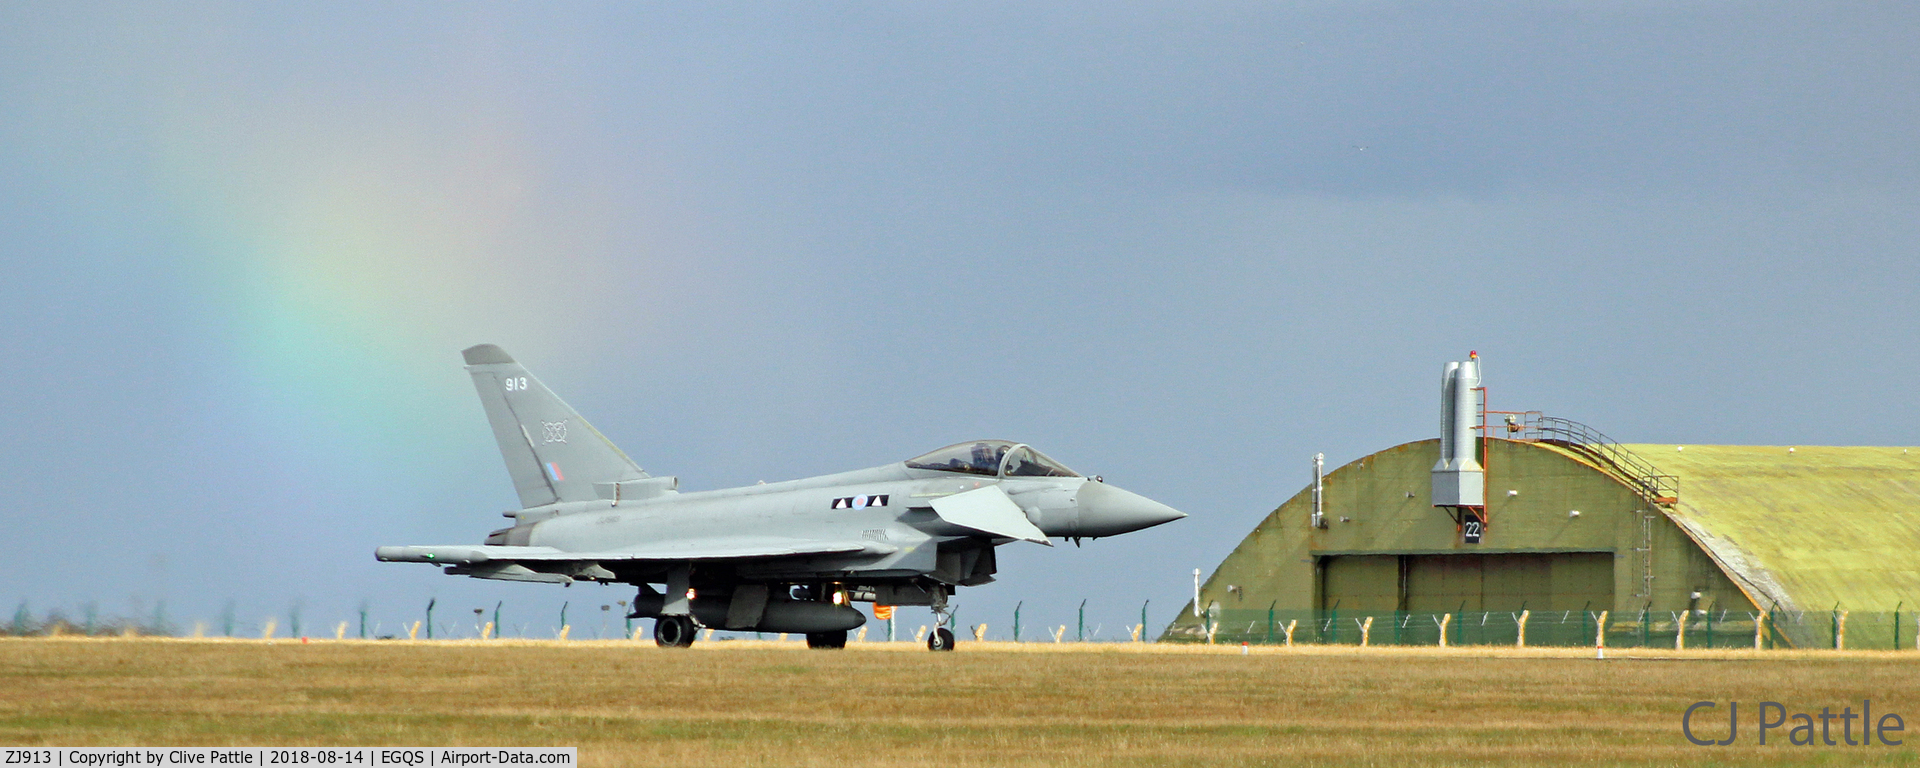 ZJ913, 2004 Eurofighter EF-2000 Typhoon FGR4 C/N 0047/BS004, Rainbow exhaust at RAF Lossiemouth. Now coded 913.